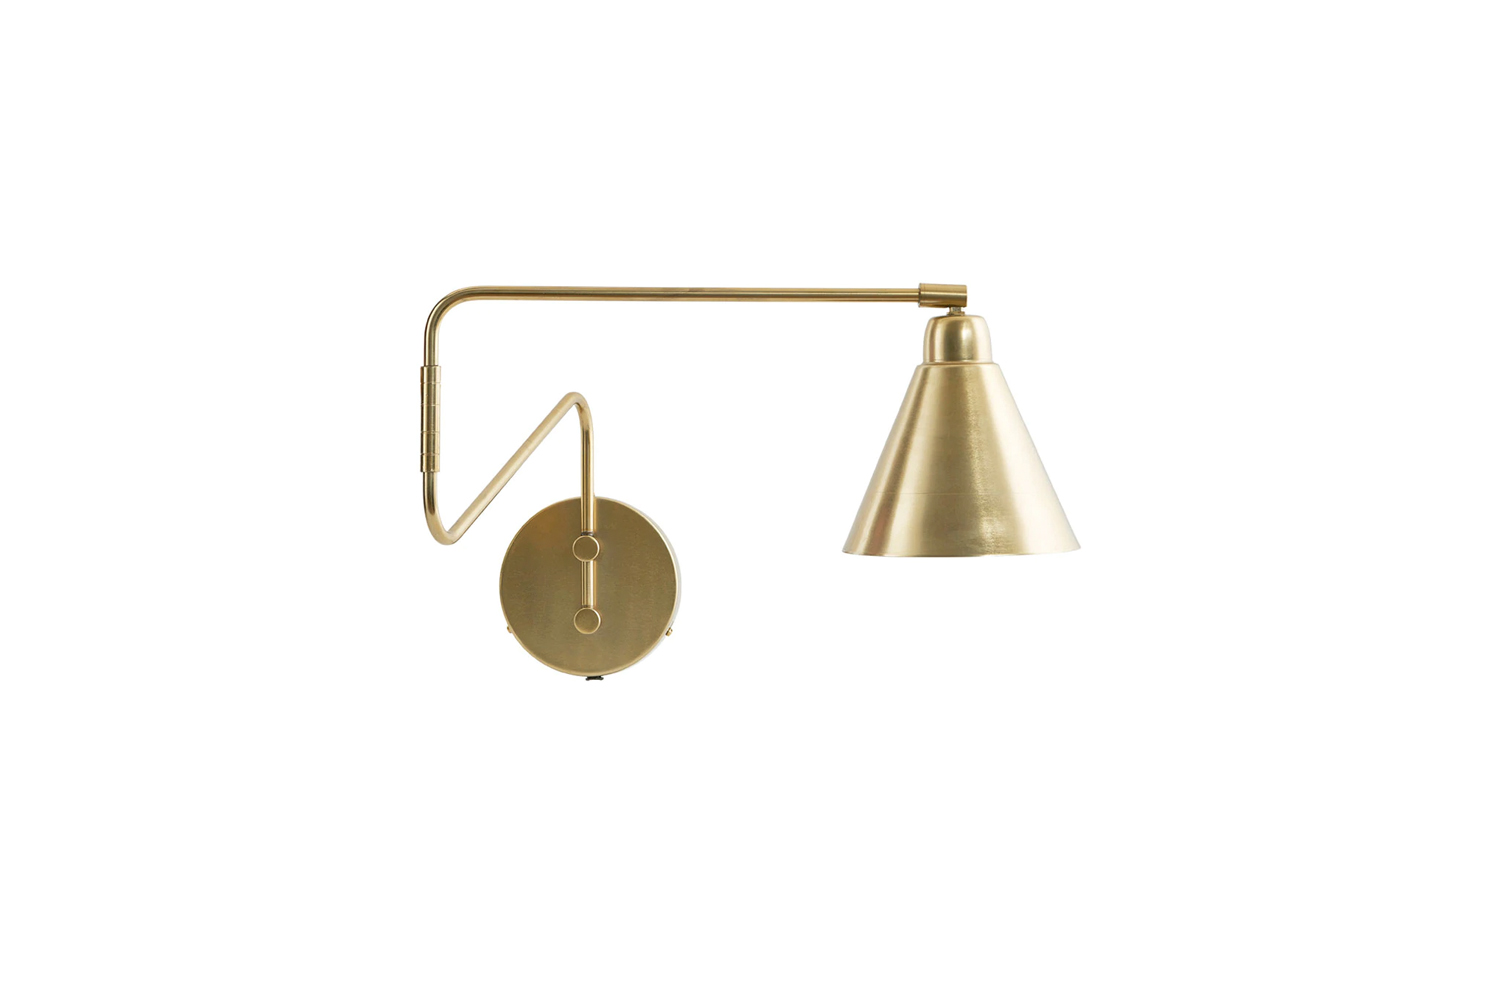 from idyll home, the brass wall lamp game long is £\138. 16